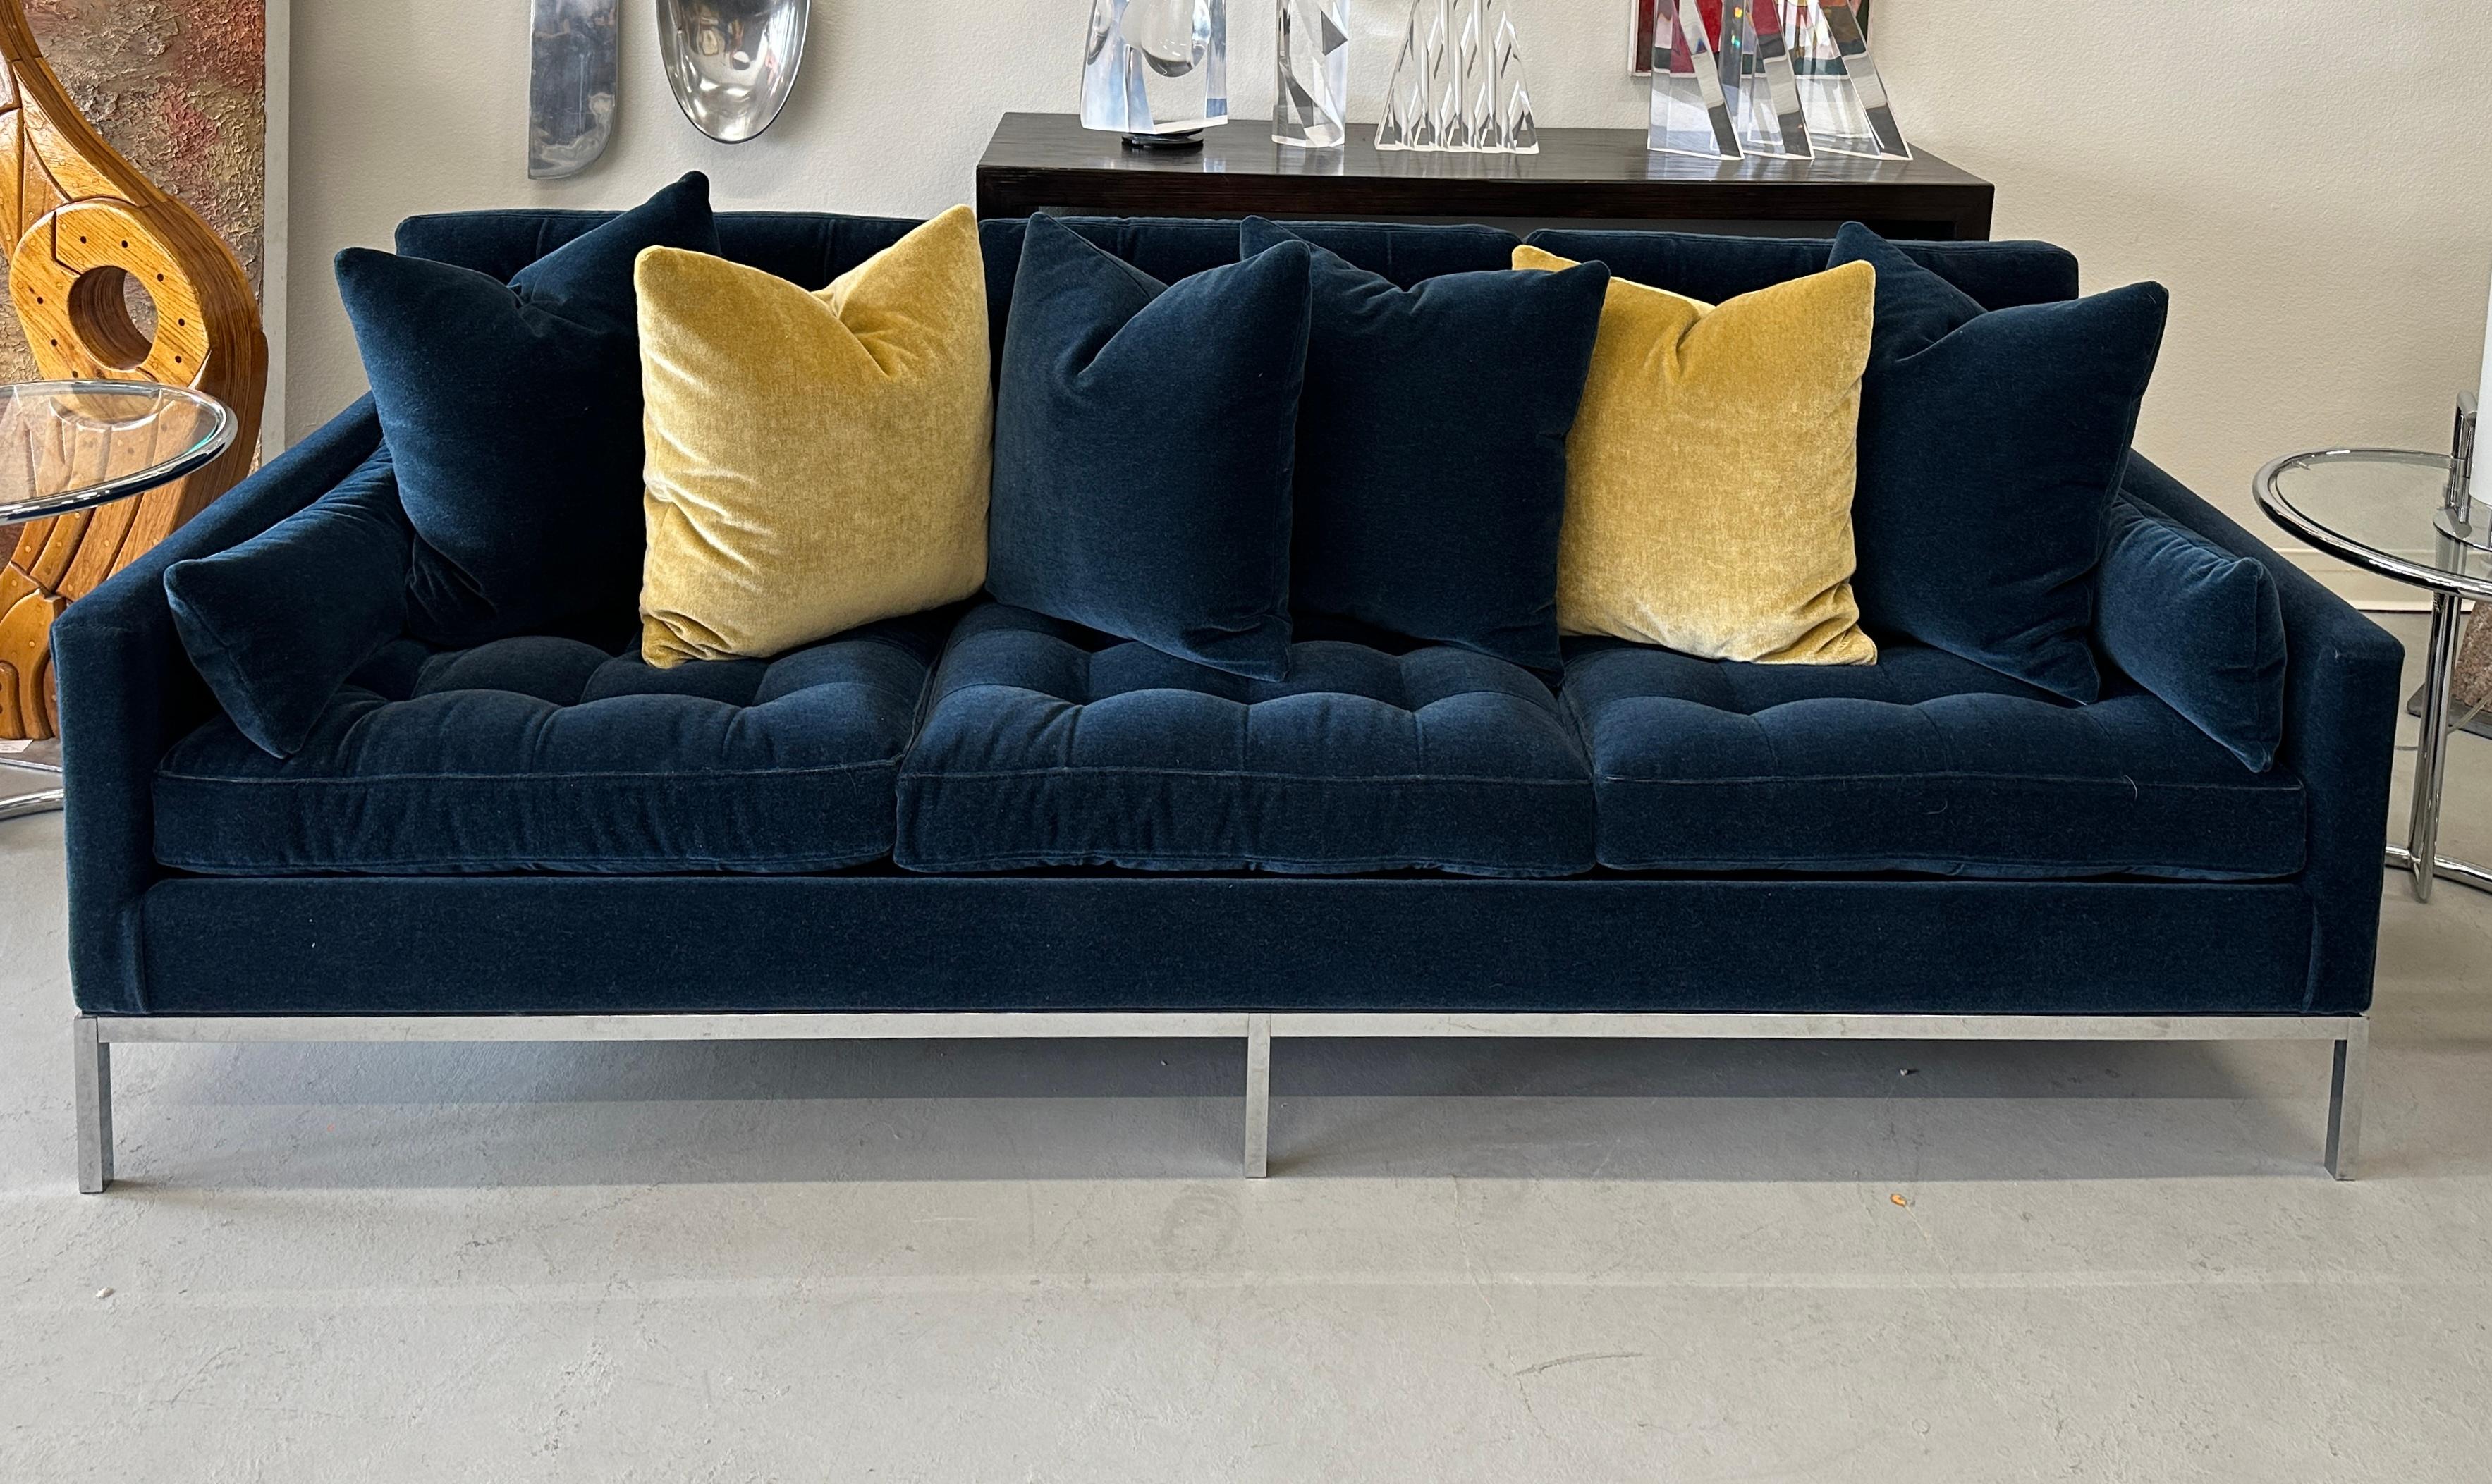 A stunning vintage 1960s Florence Knoll sofa that we had redone and reupholstered in a beautiful Kravet wool mohair. Color is called indigo blue. A rich navy color. We had 6 extra back pillows and 2 side cushions made at the same time. The sofa is